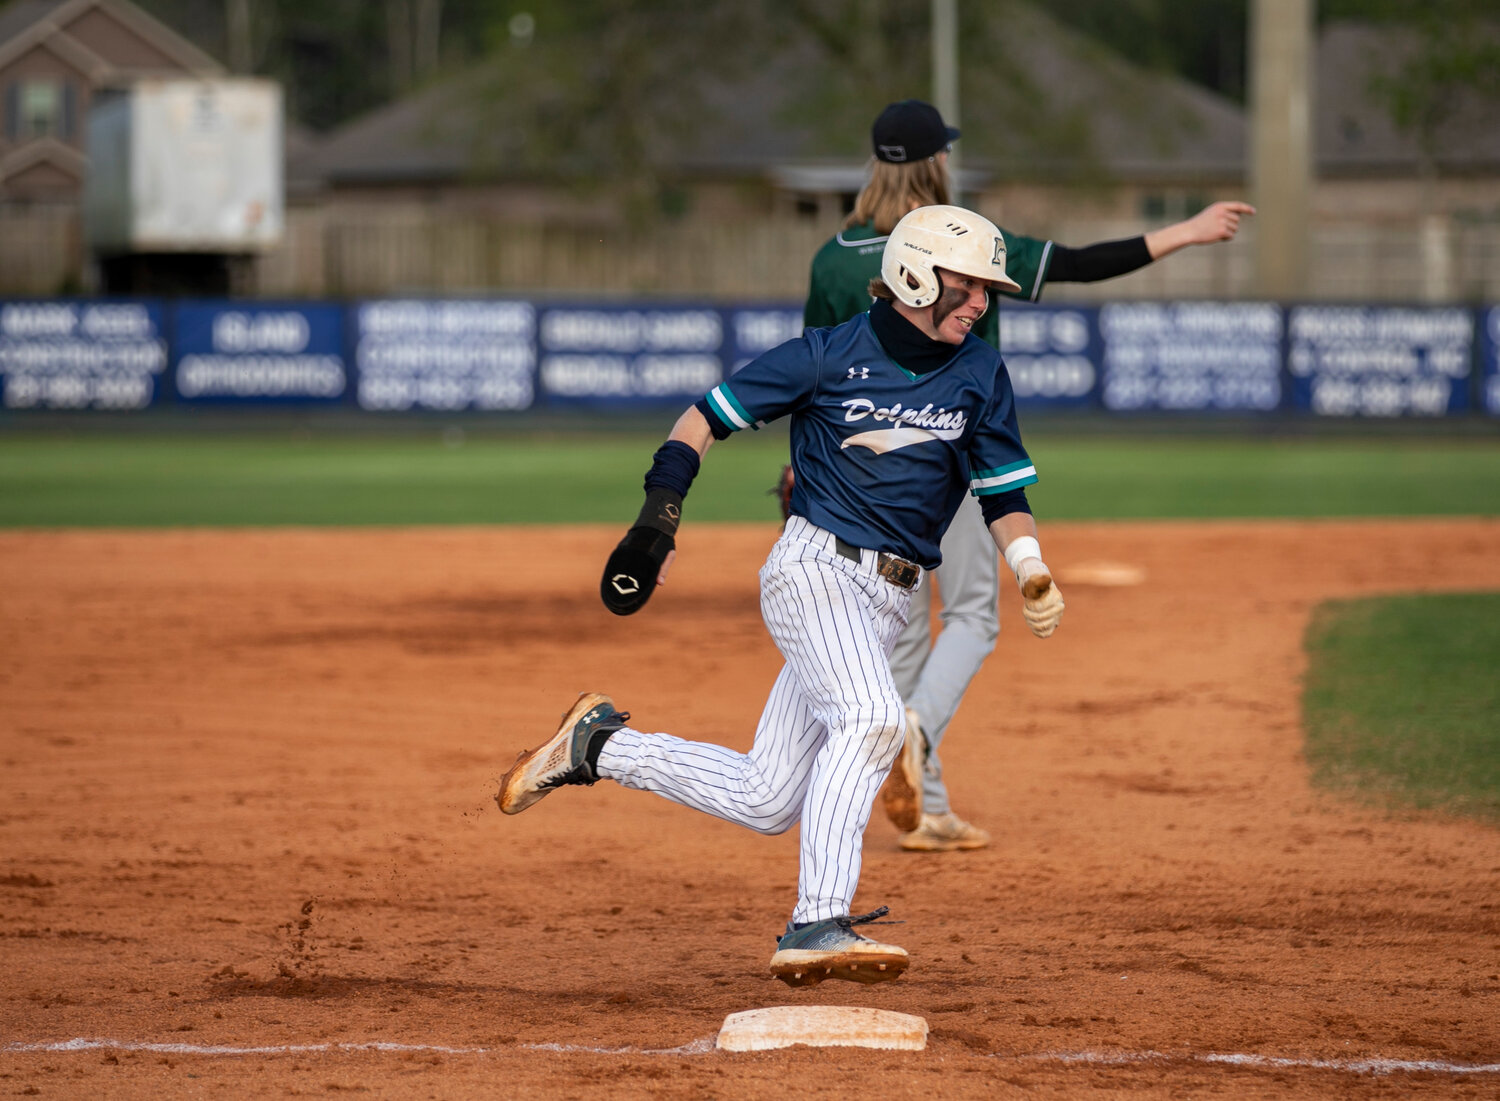 Dolphin junior Joseph Stephens rounds third to head home and score a run against the Muskogee Roughers from Oklahoma during the Gulf Coast Classic tournament on March 13. Stephens scored 43 runs on the season to help Gulf Shores claim a third straight area crown.